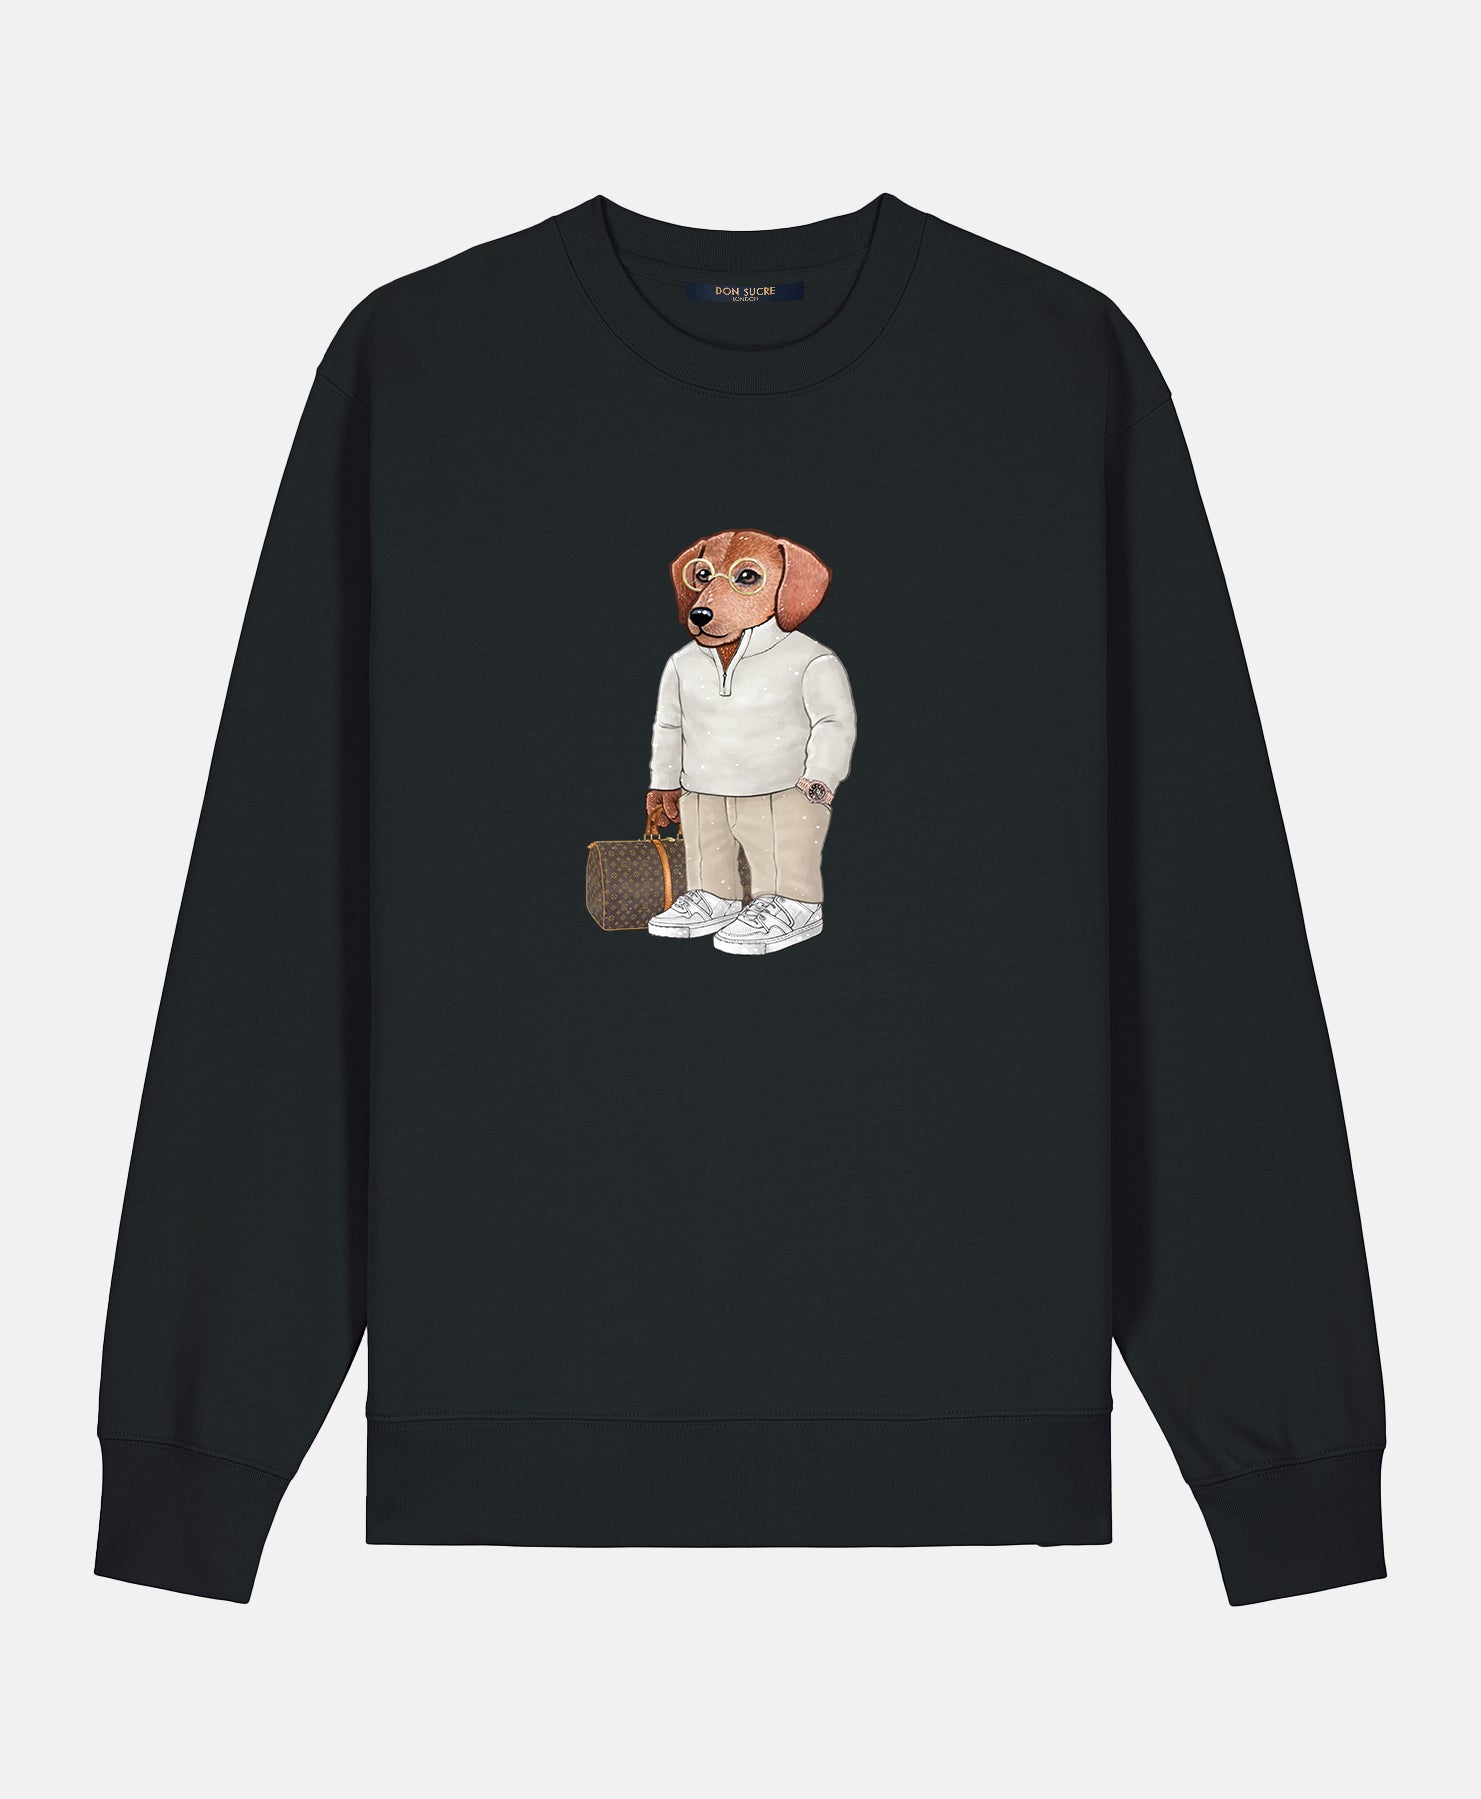 Doxie "Top Dog" Jumper